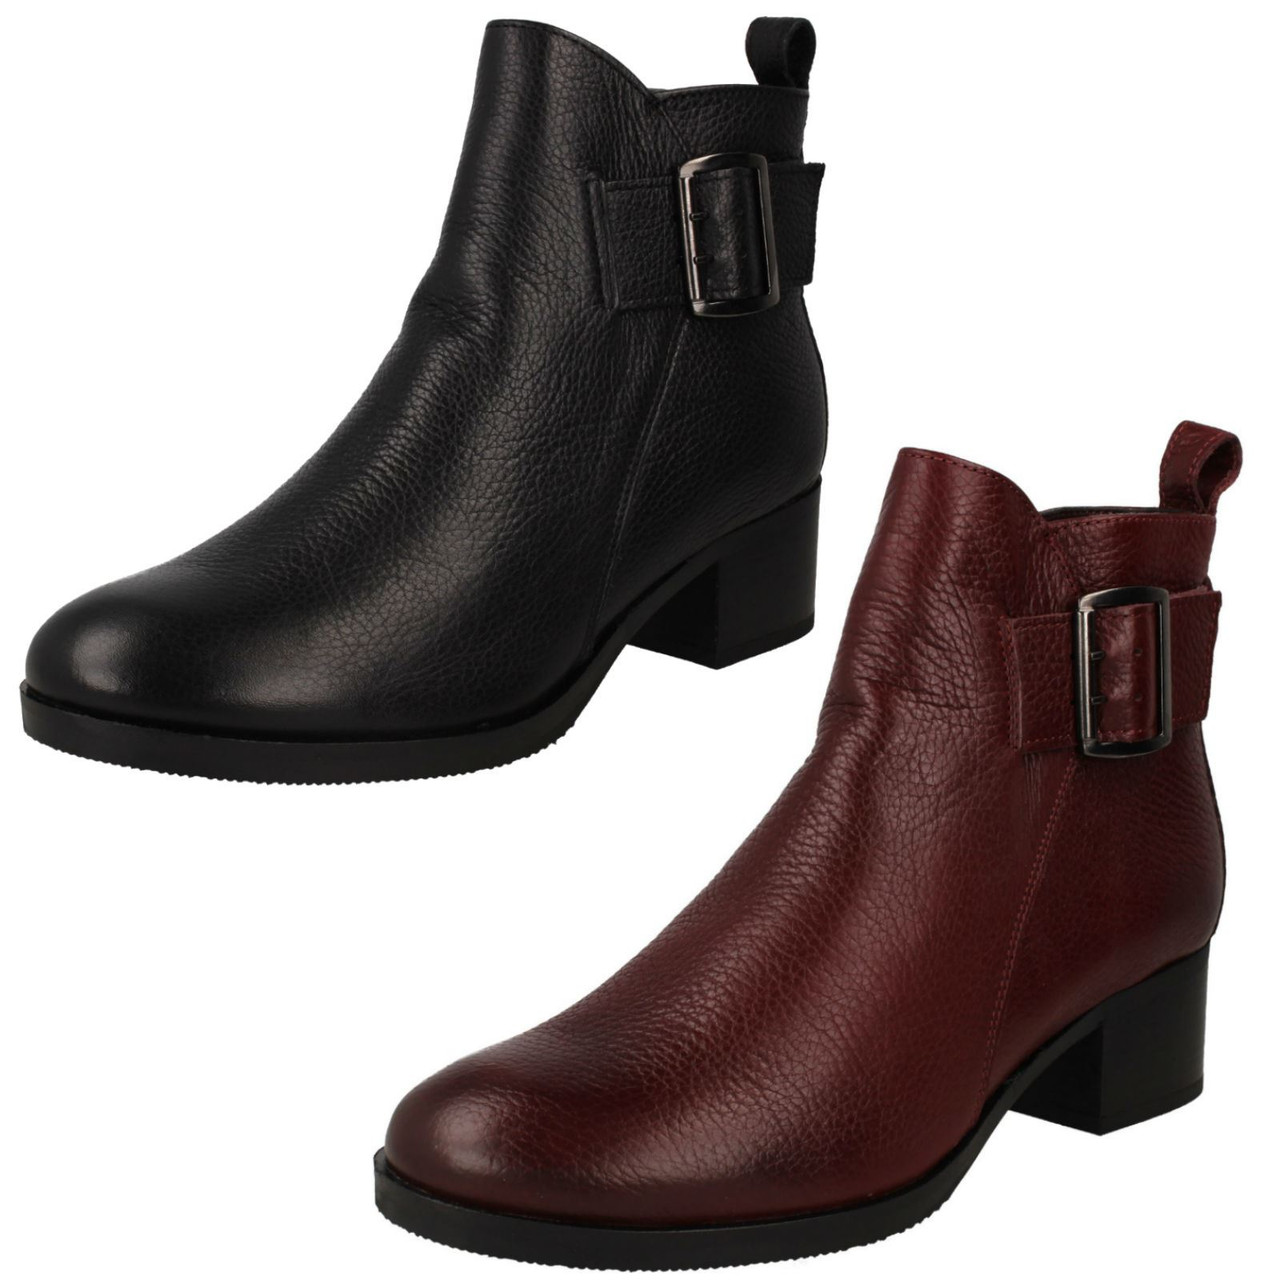 Ladies Clarks Ankle Boots Mila Charm